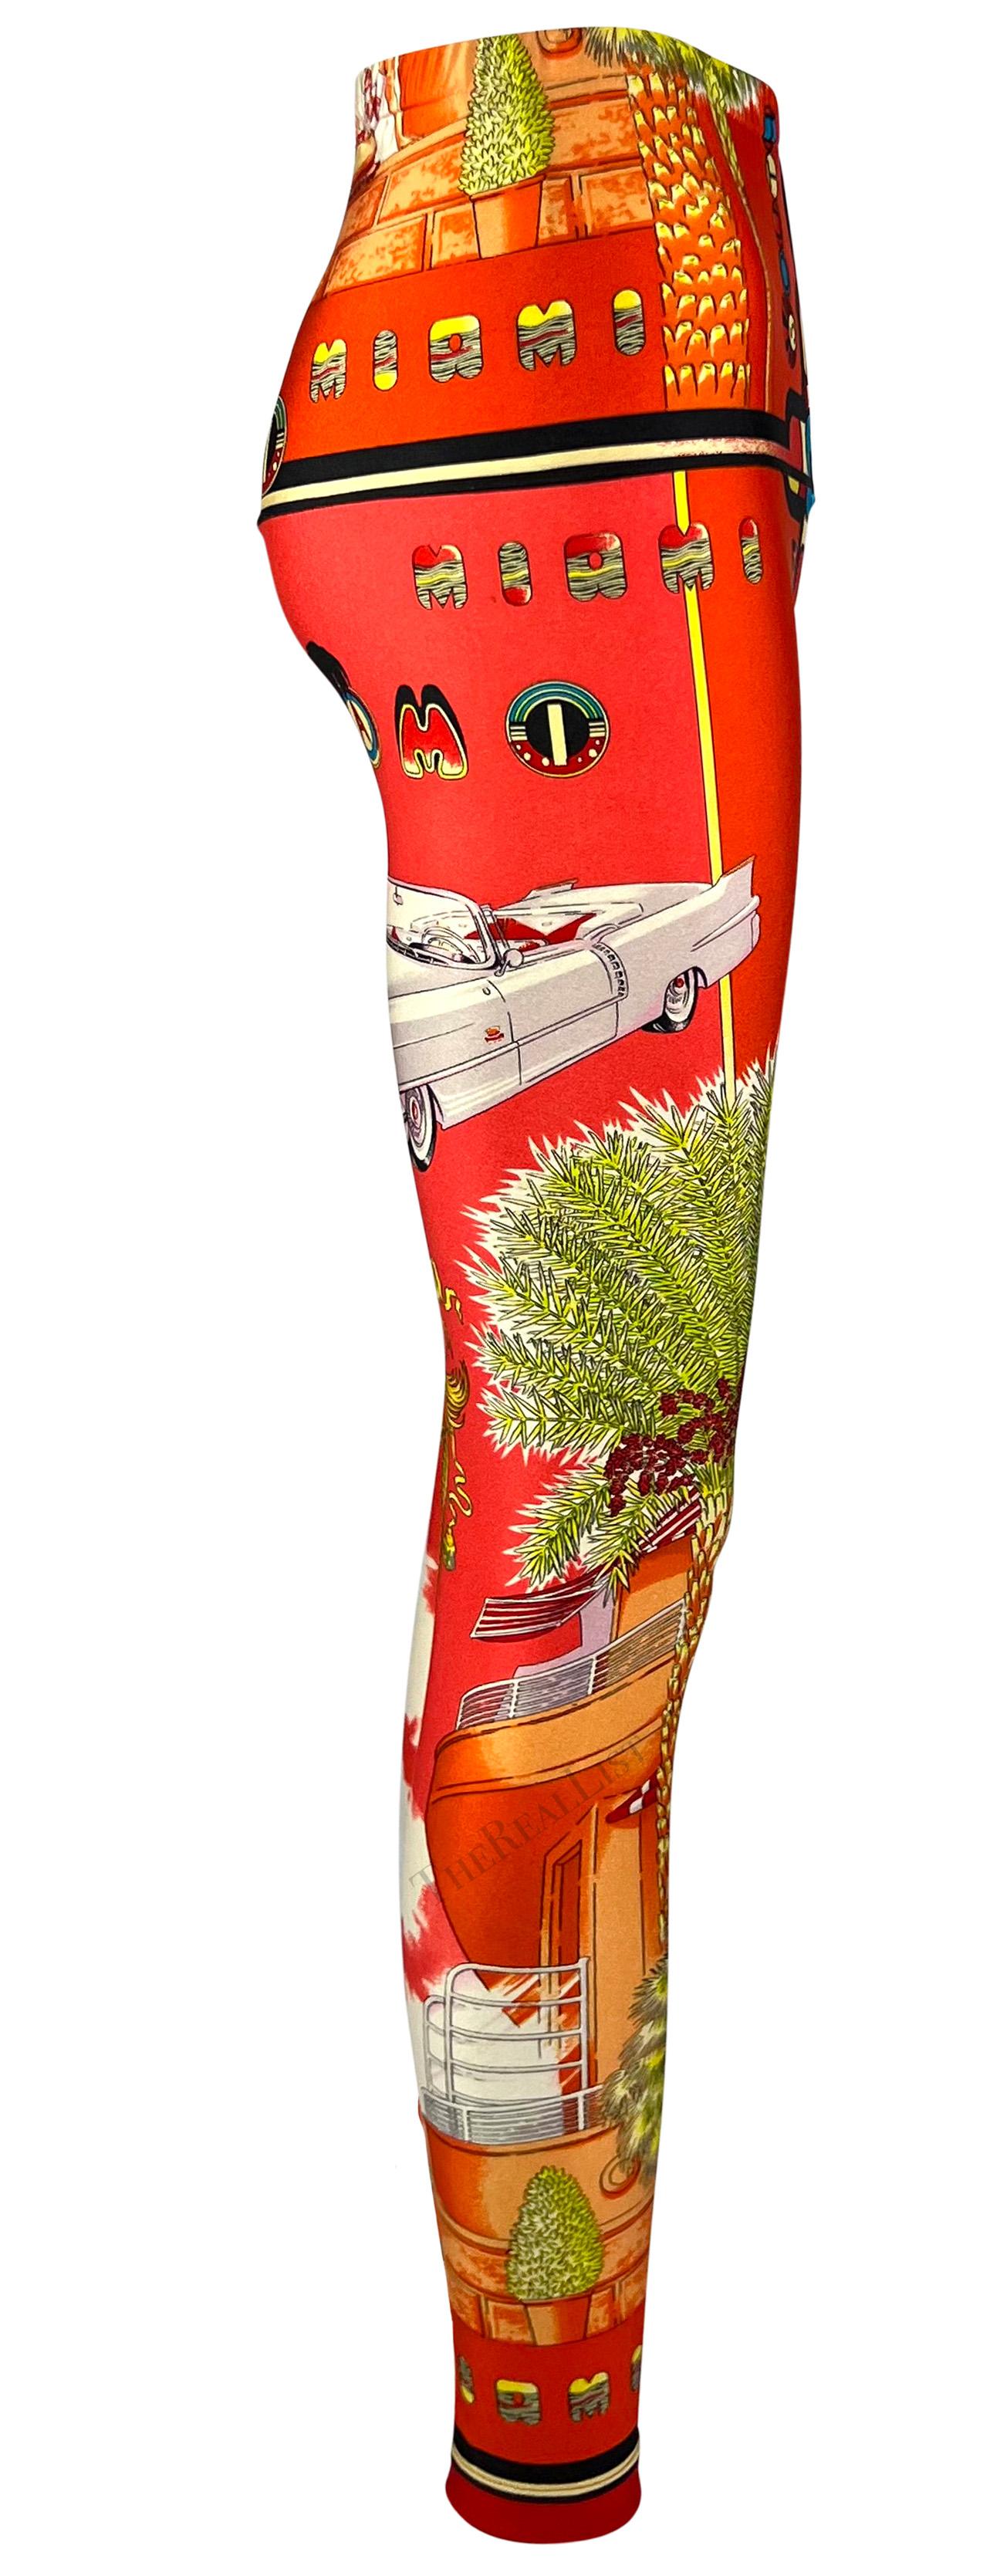 S/S 1993 Gianni Versace South Beach Miami Sunset Orange Red Florida Print Tights For Sale 3